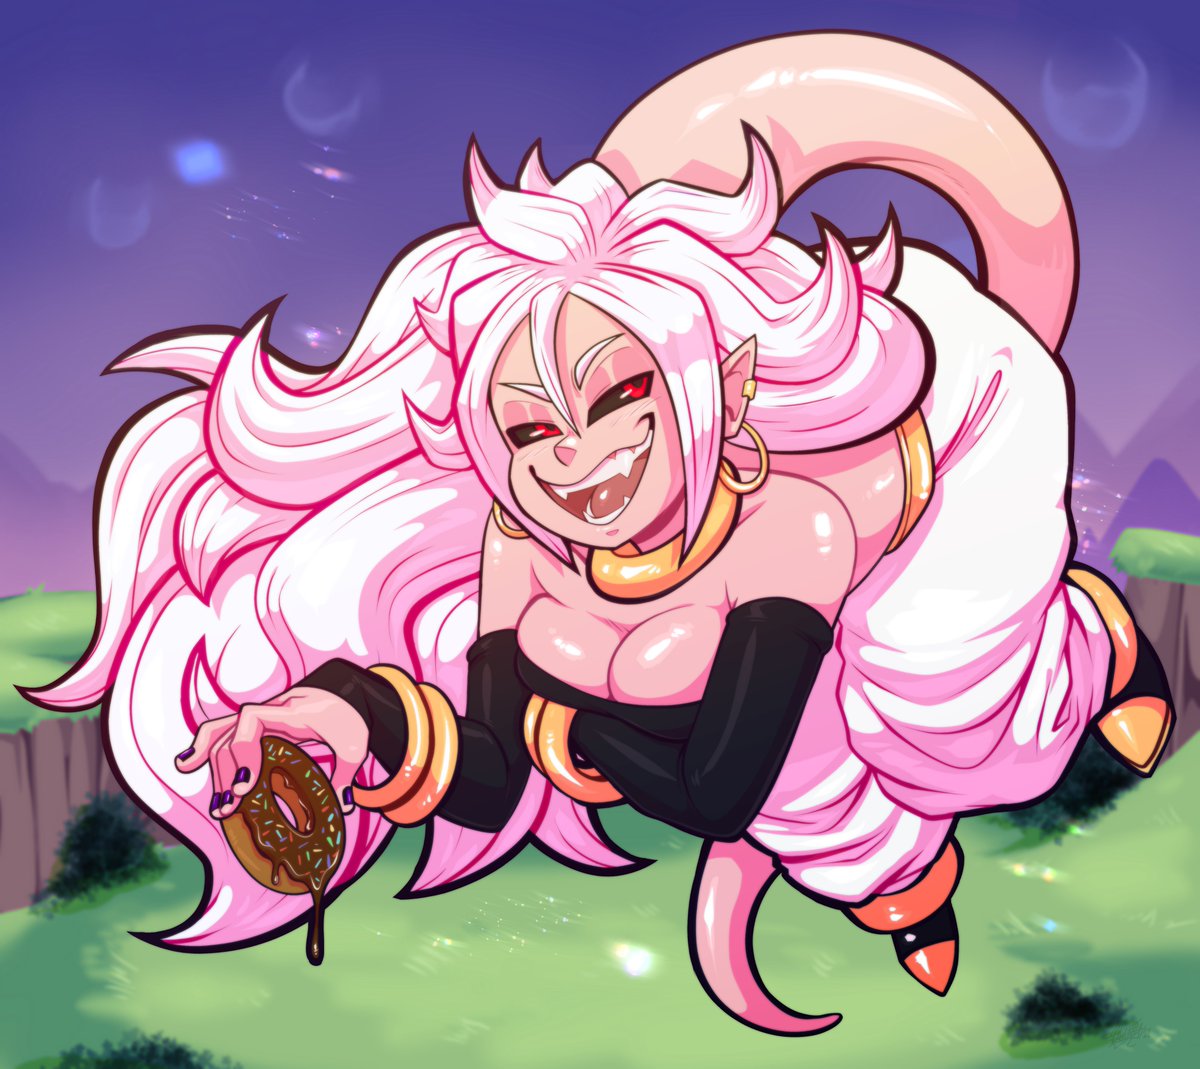 Android 21 commission from. 